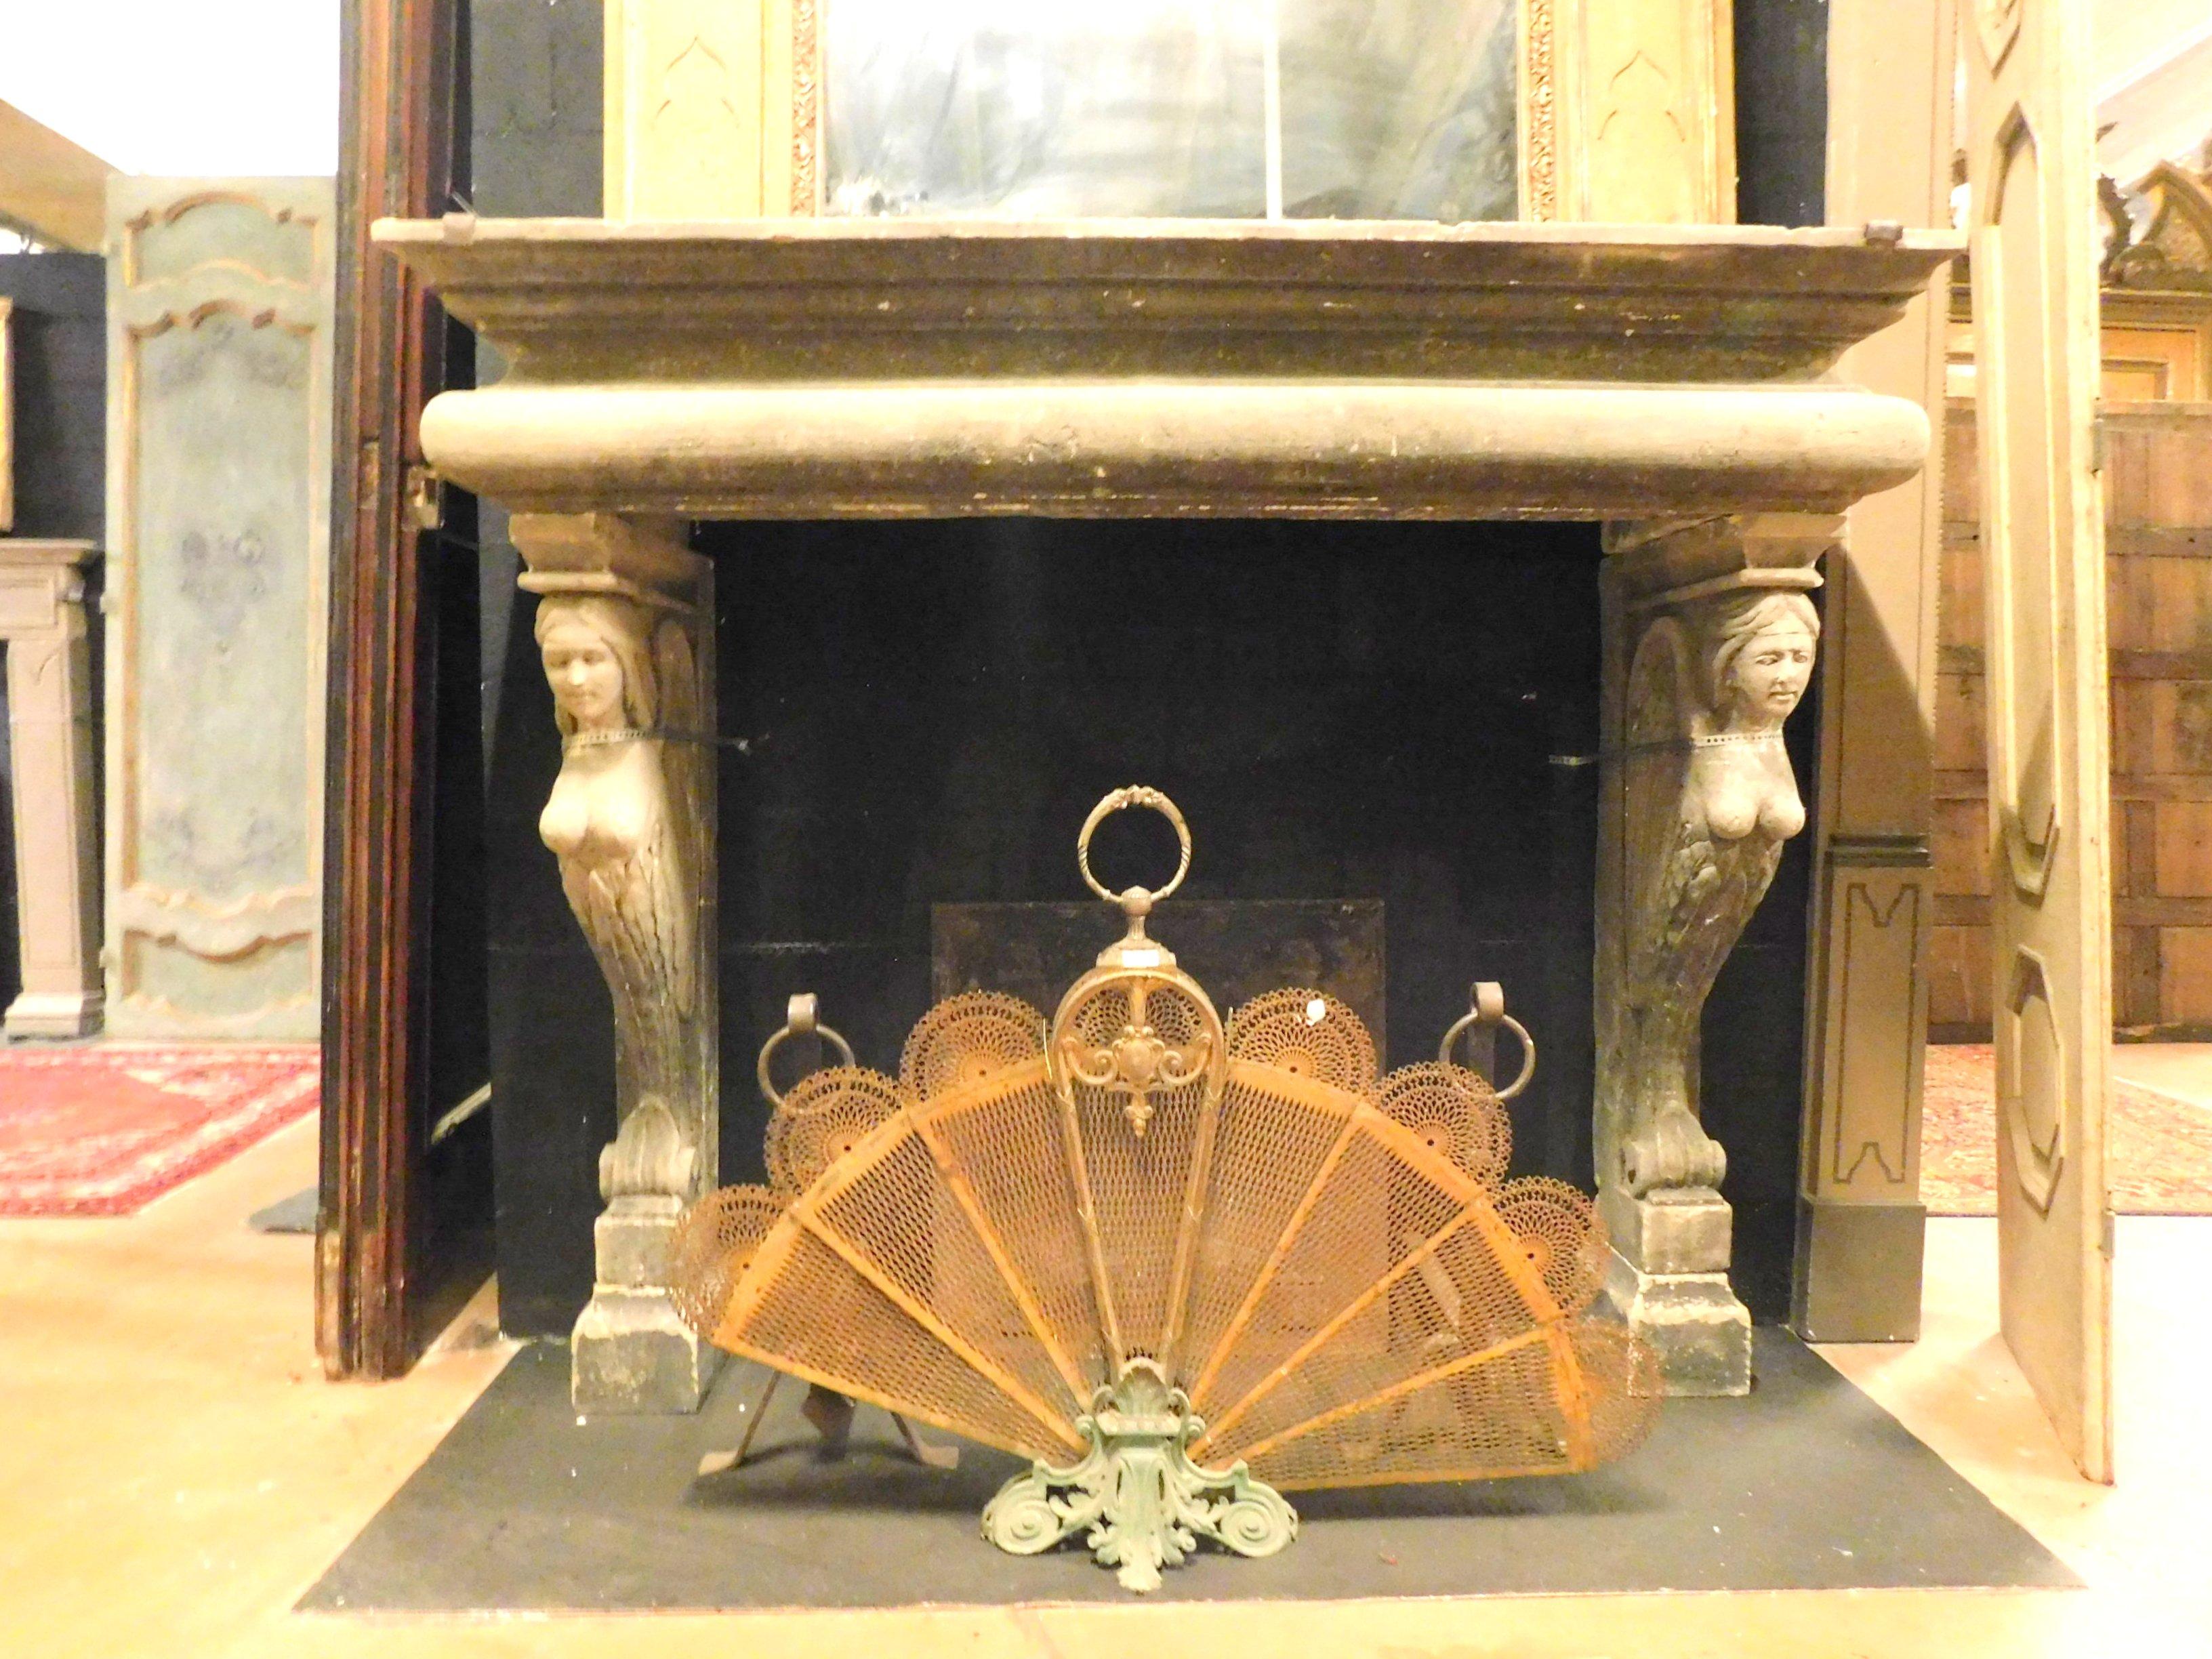 Hand-Carved Antique Carved Stone Fireplace, Winged Caryatids, Large and Richly, 1800, Italy